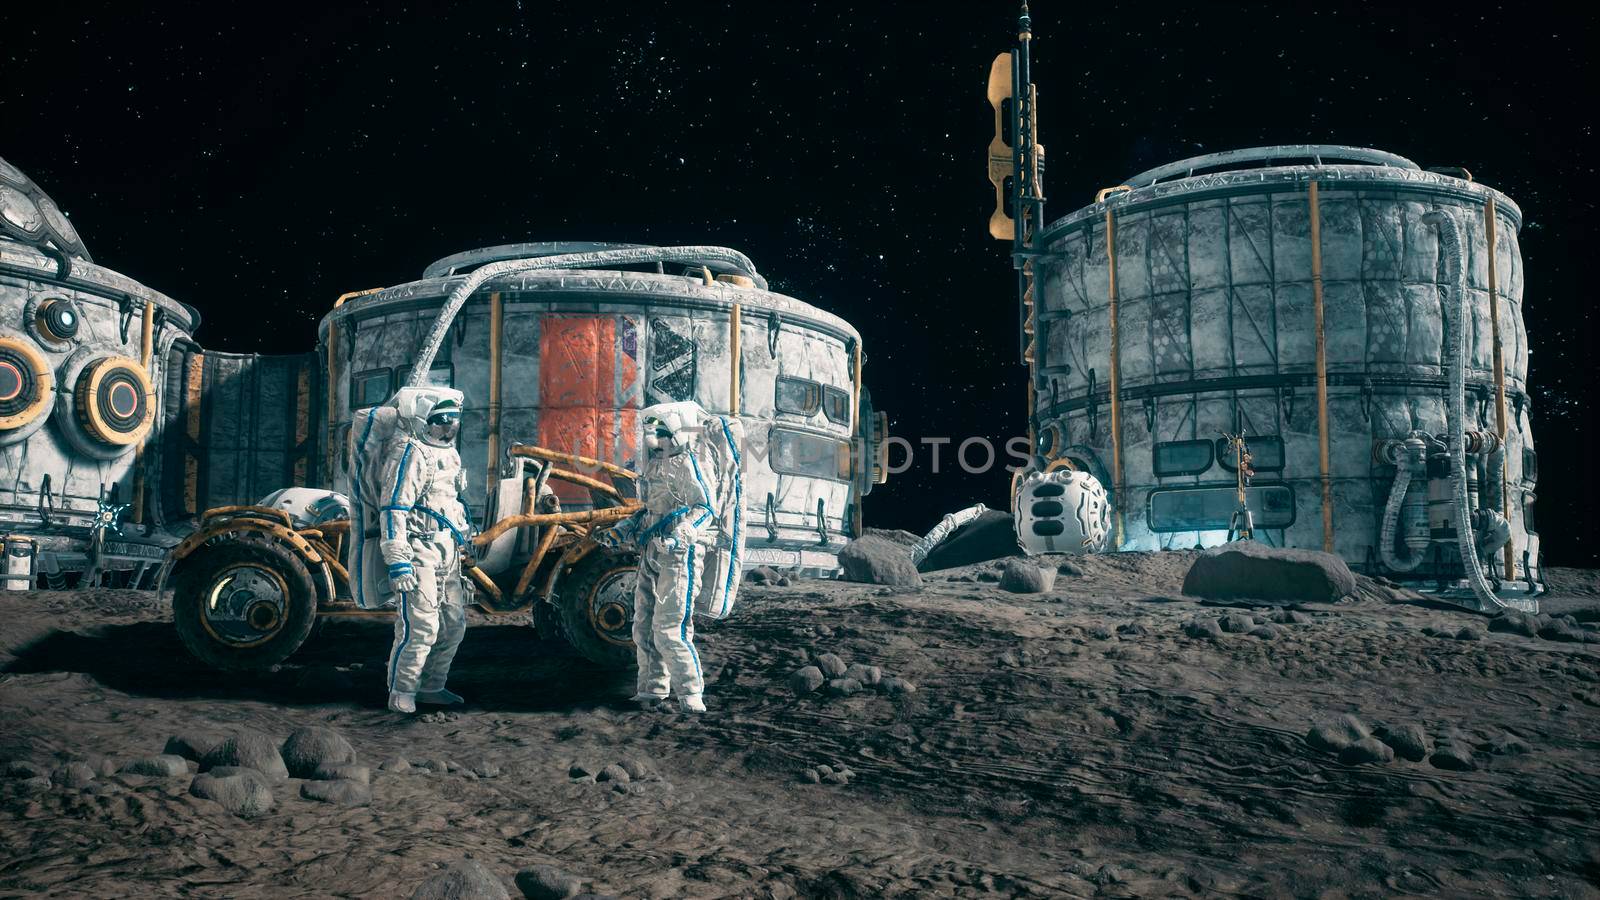 Meeting of astronauts at the lunar base near the lunar rover. View of the lunar colony and astronauts working at the space base. Concept of the future lunar colony.